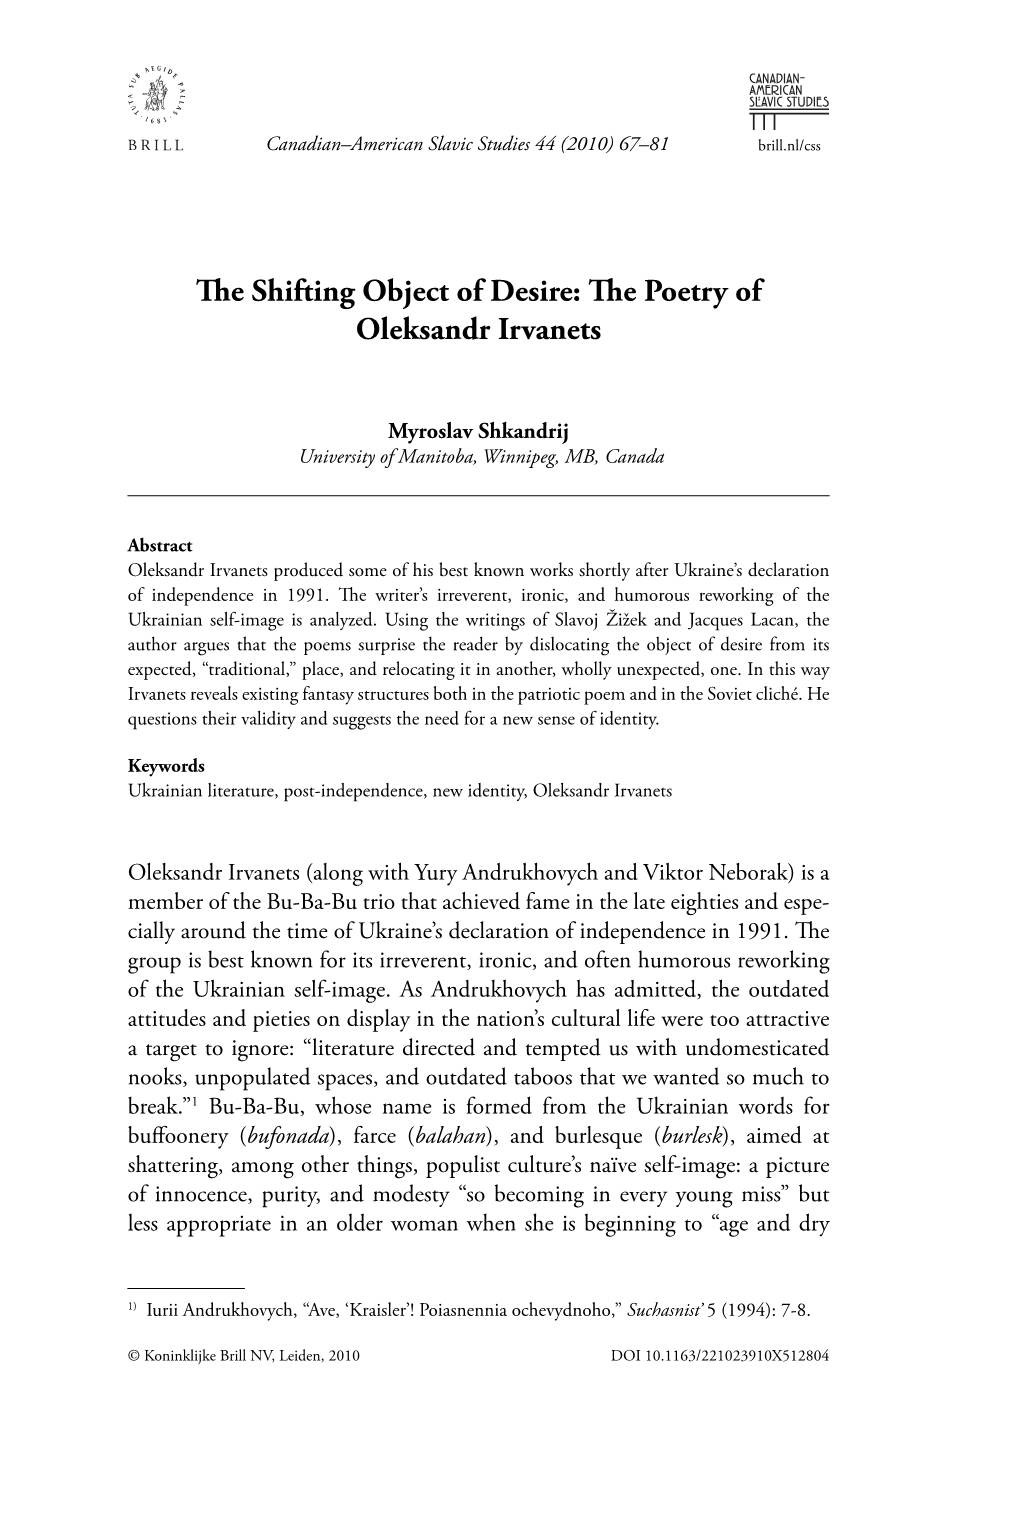 The Shifting Object of Desire: the Poetry of Oleksandr Irvanets